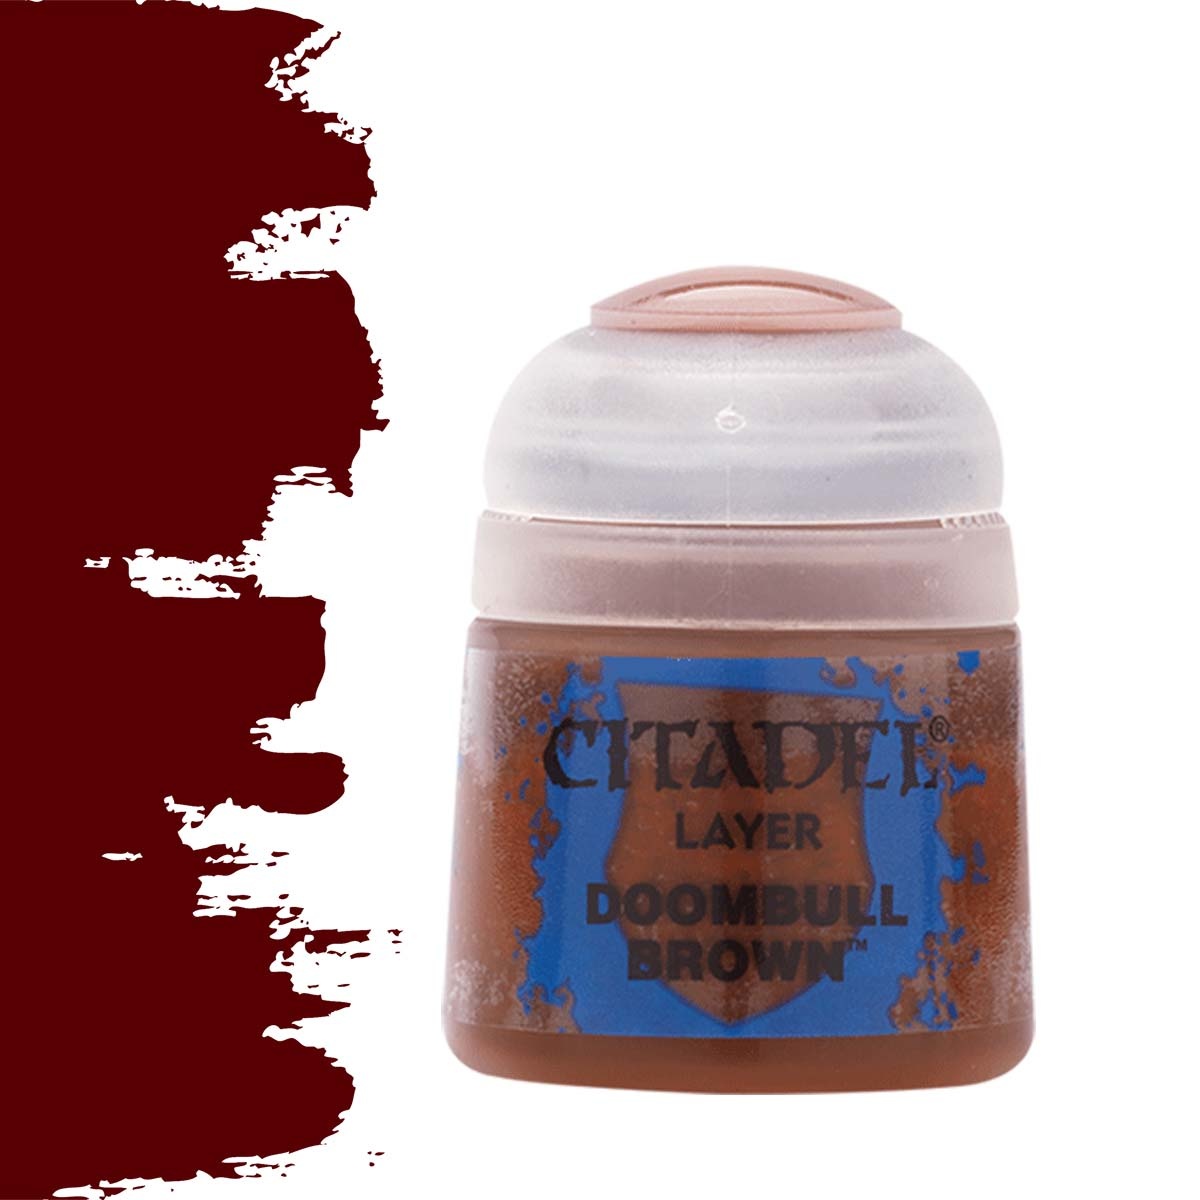 Citadel Doombull Brown - Layer Paint - 12ml - 22-45 - Buy now at ...